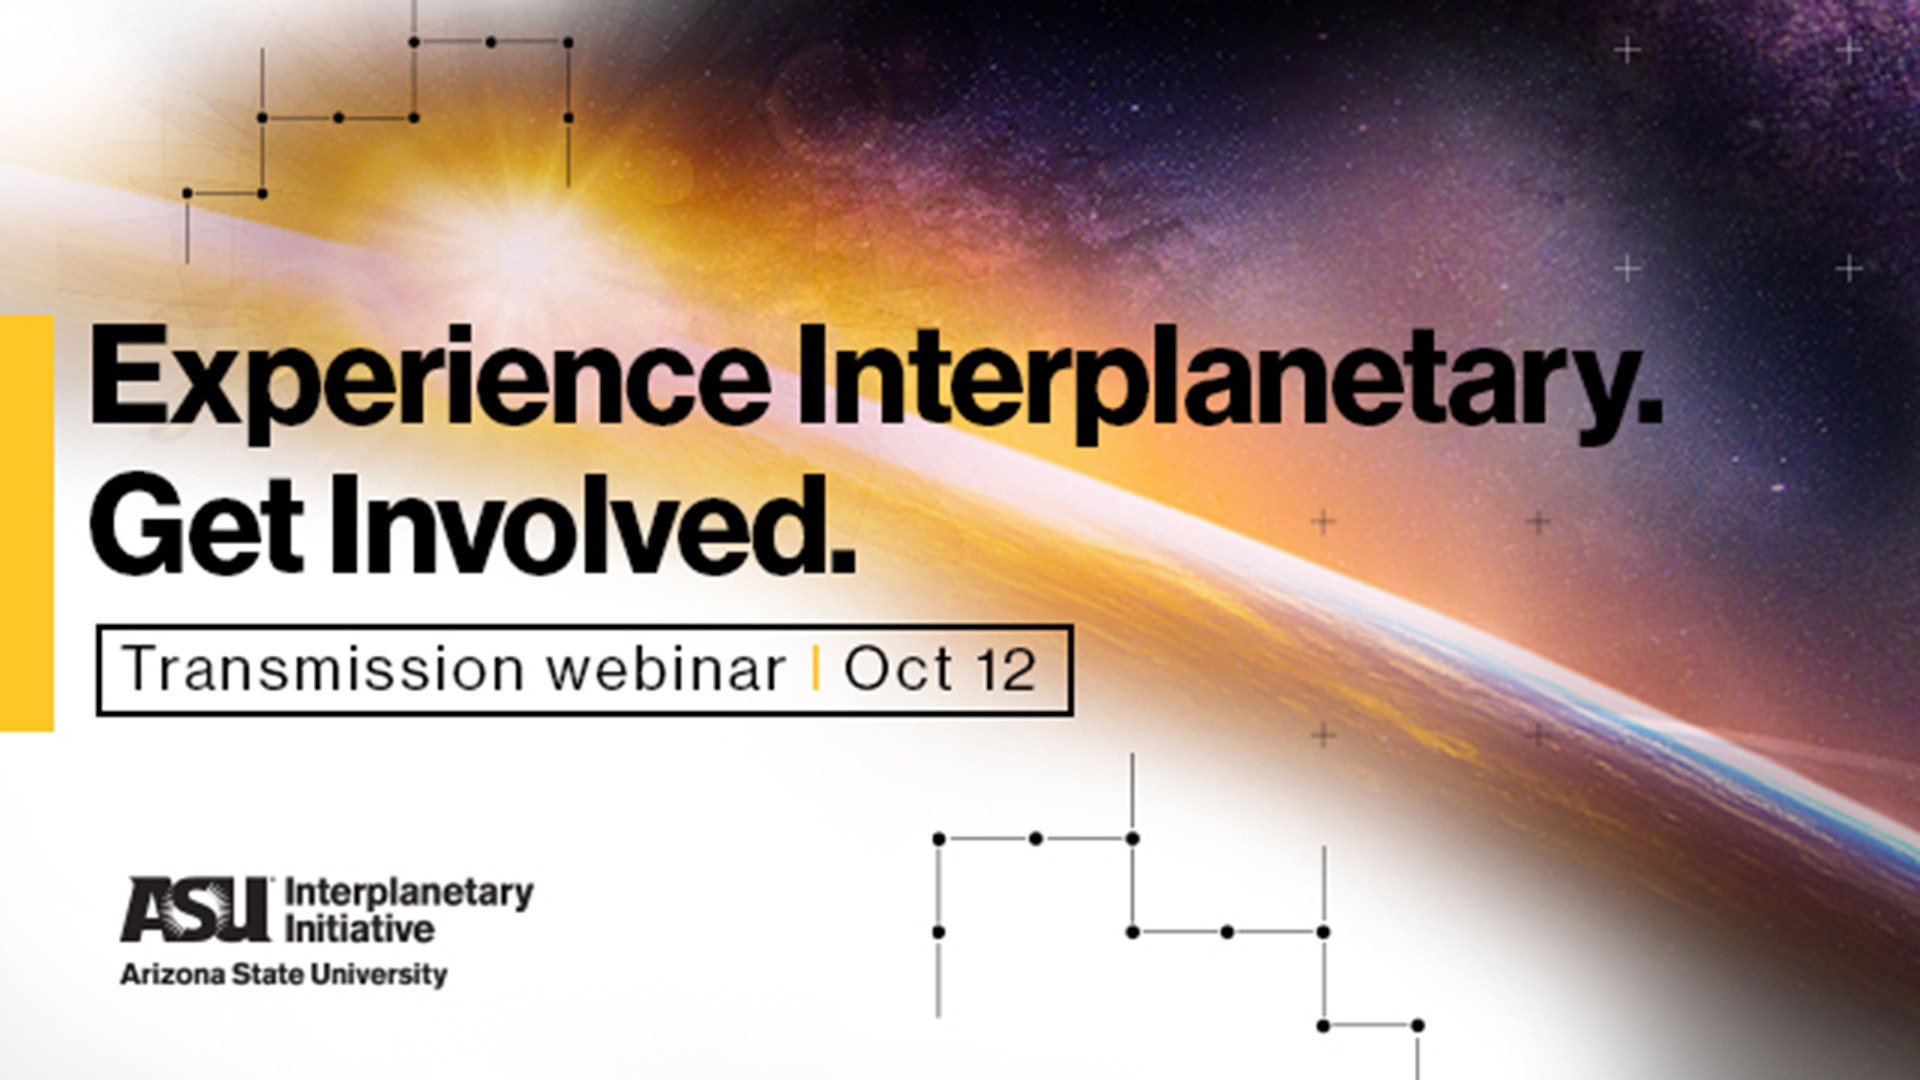 Graphic that says "Experience Interplanetary. Get Involved. Transmission webinar October 12."